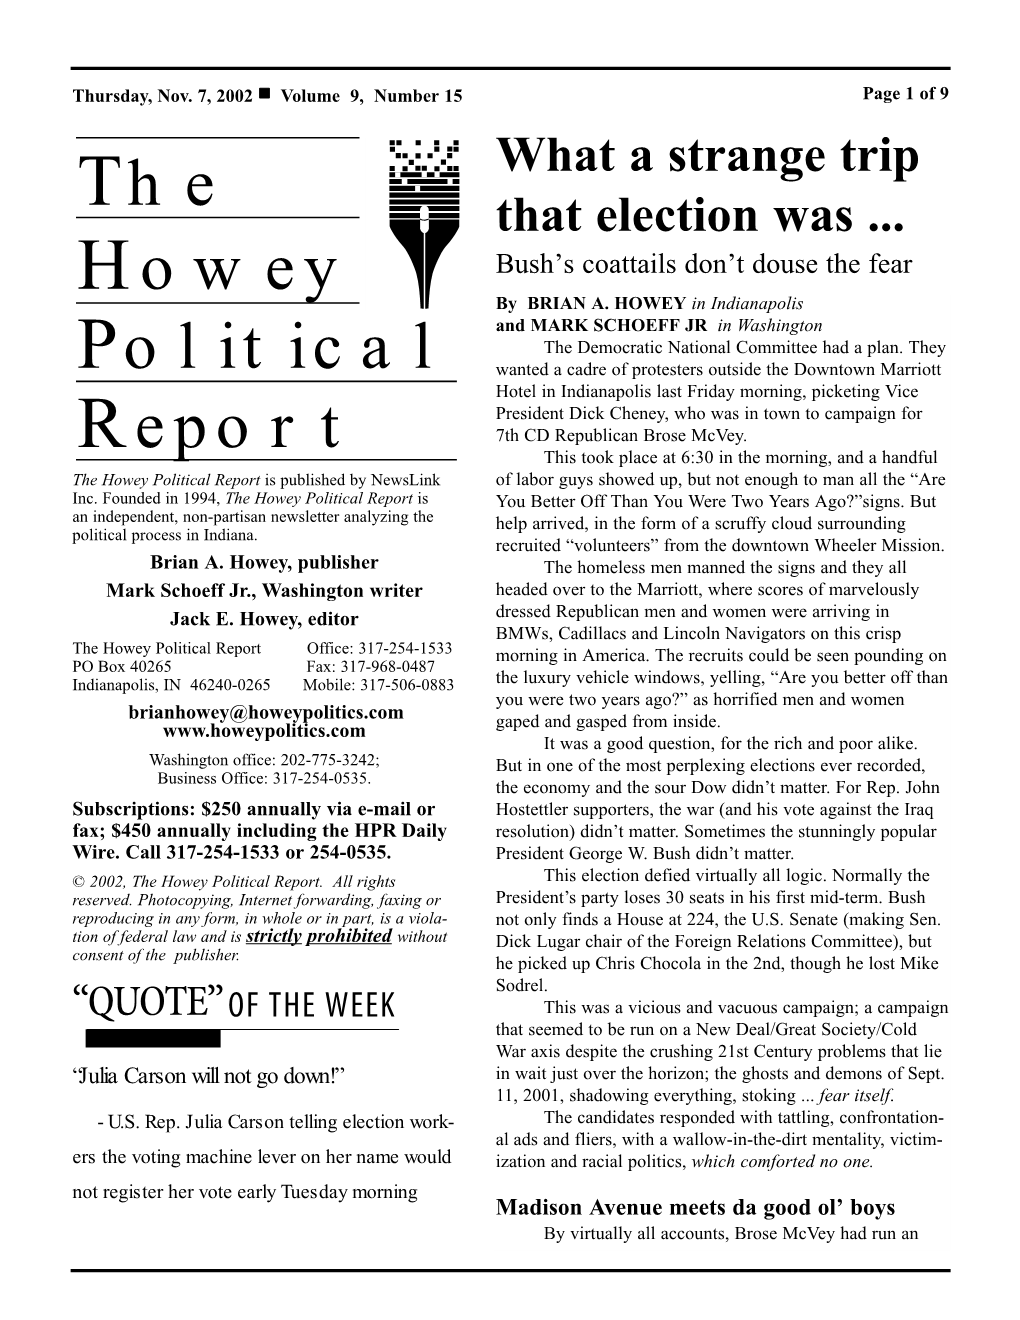 The Howey Political Report Is Published by Newslink of Labor Guys Showed Up, but Not Enough to Man All the “Are Inc